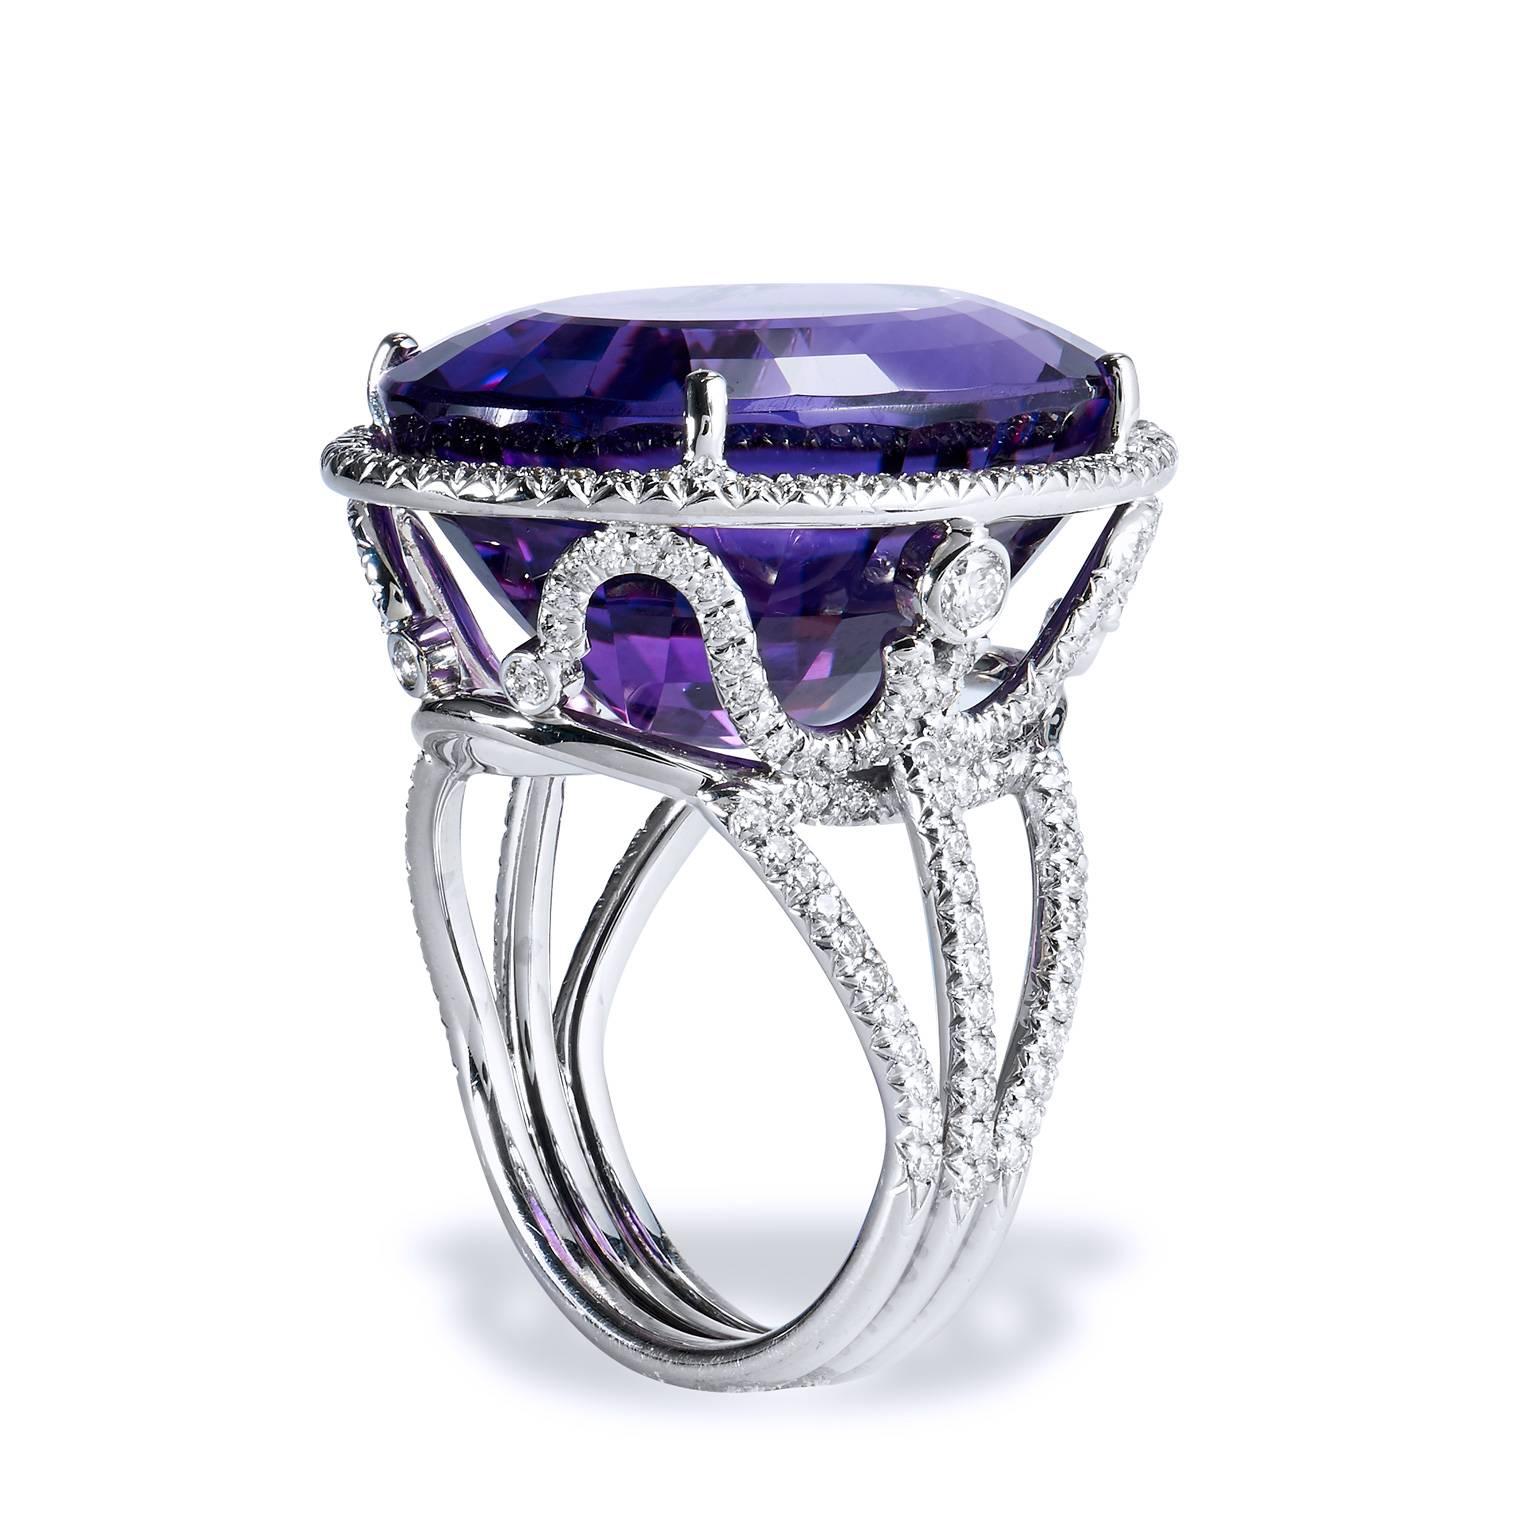 Handmade 22.70 Carat Amethyst and Diamond 18 Karat White Gold Cocktail Ring In New Condition For Sale In Miami, FL